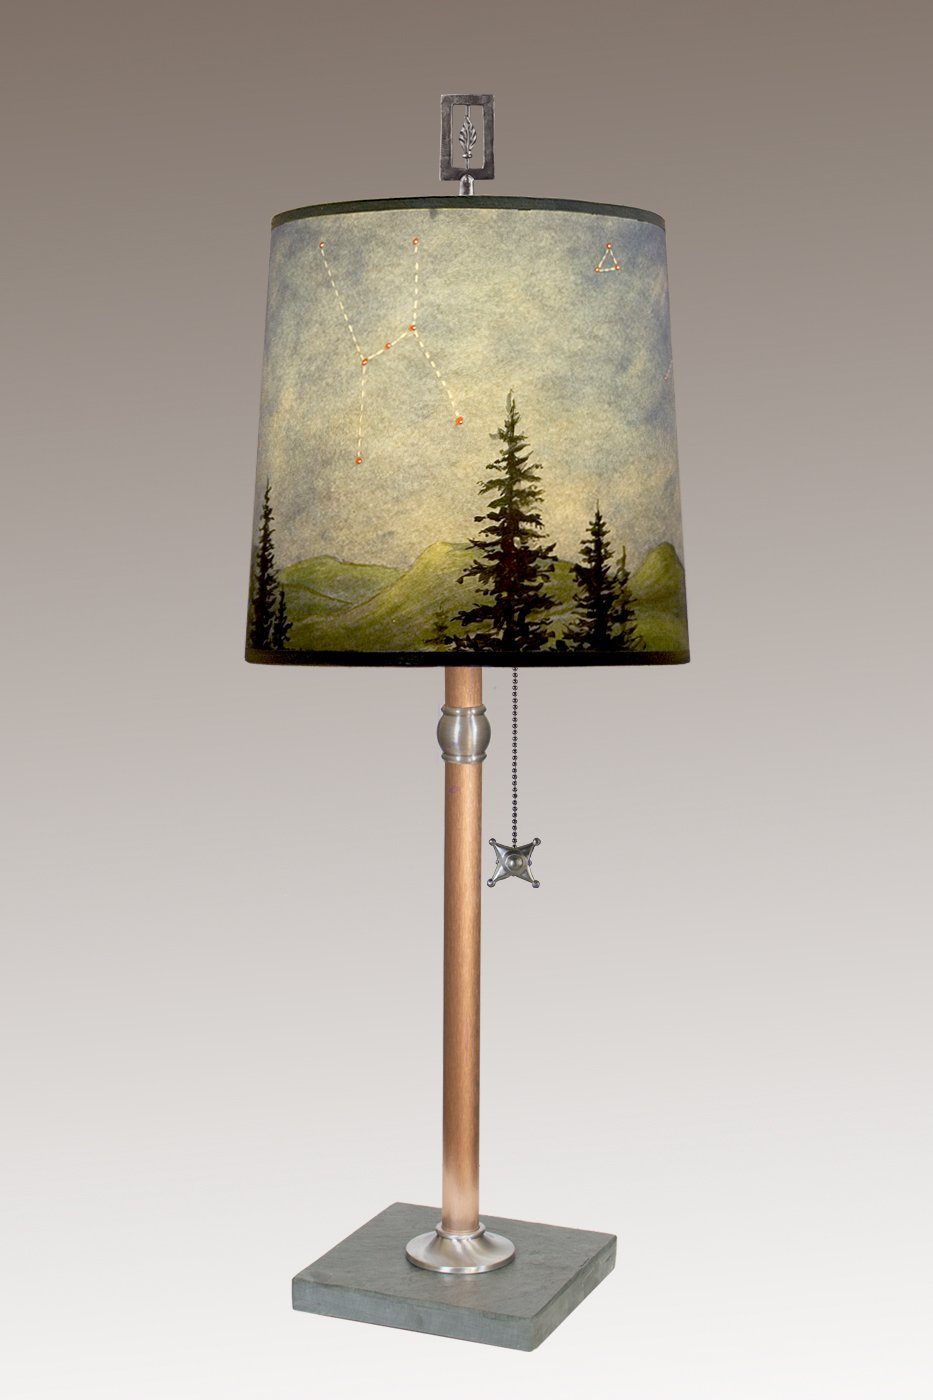 Janna Ugone & Co Table Lamps Copper Table Lamp with Medium Drum Shade in Midnight Sky